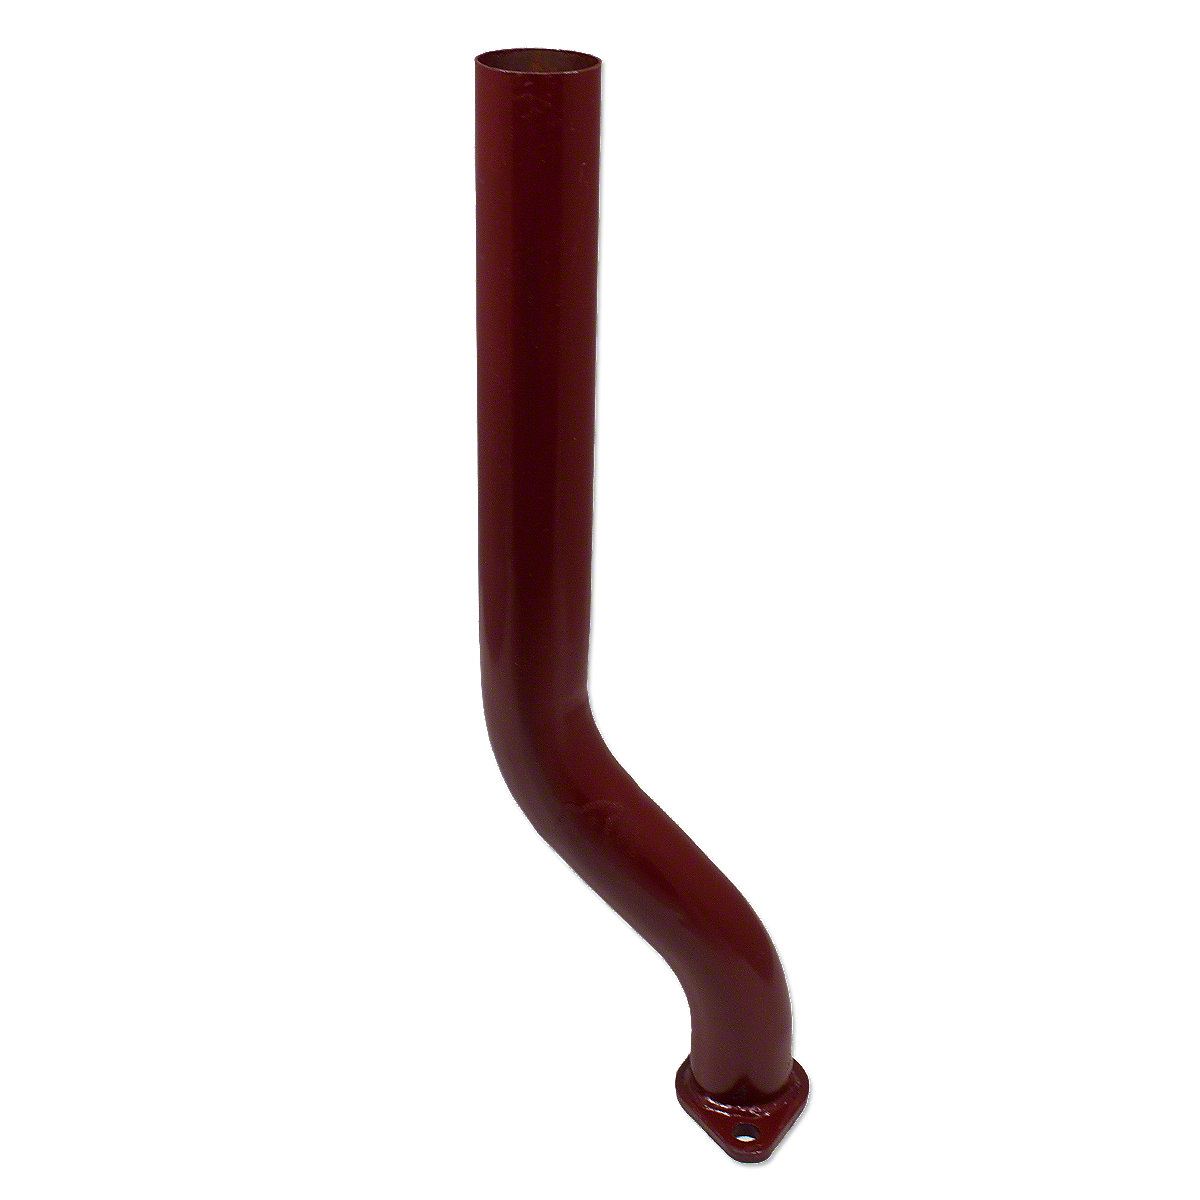 Exhaust Pipe for F12, F14 with Gas Manifold